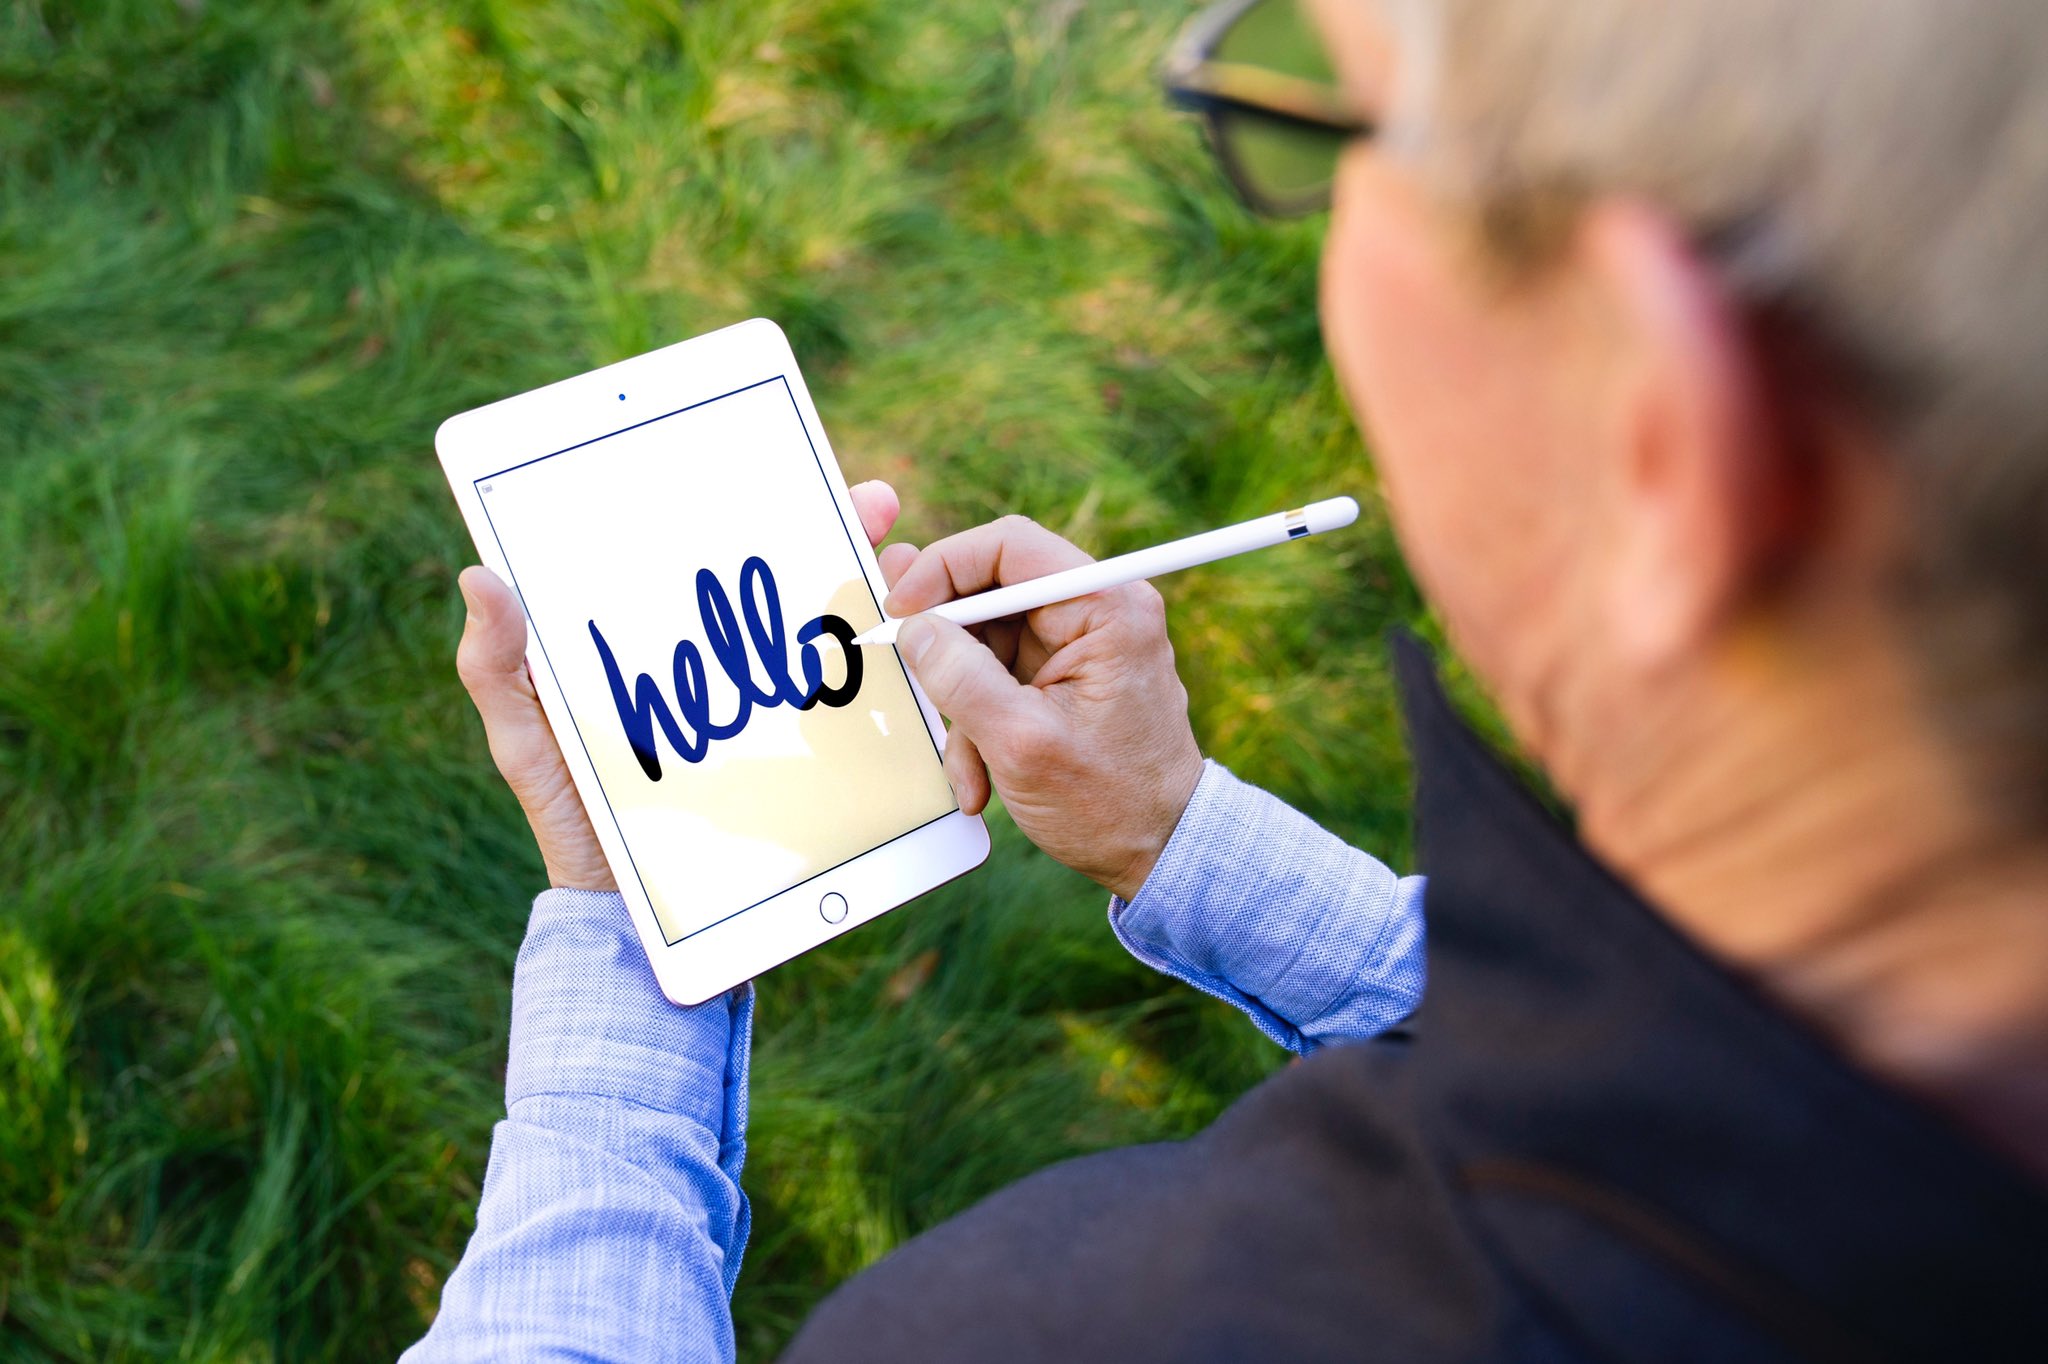 Apple's press photo showing CEO Tim Cook drawing the word "hello" with his Apple Pencil on iPad mini